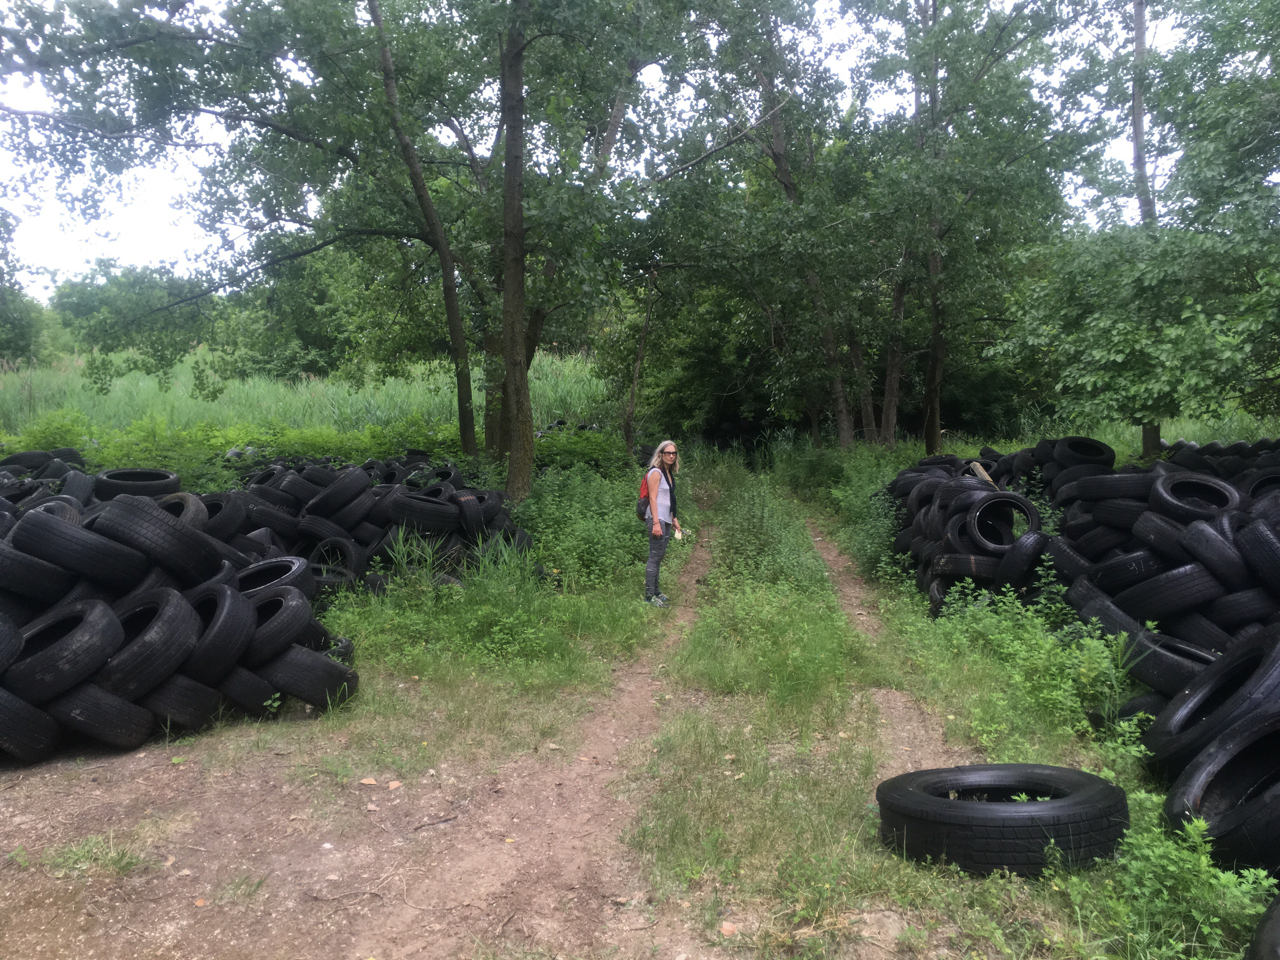 author in a field of tires